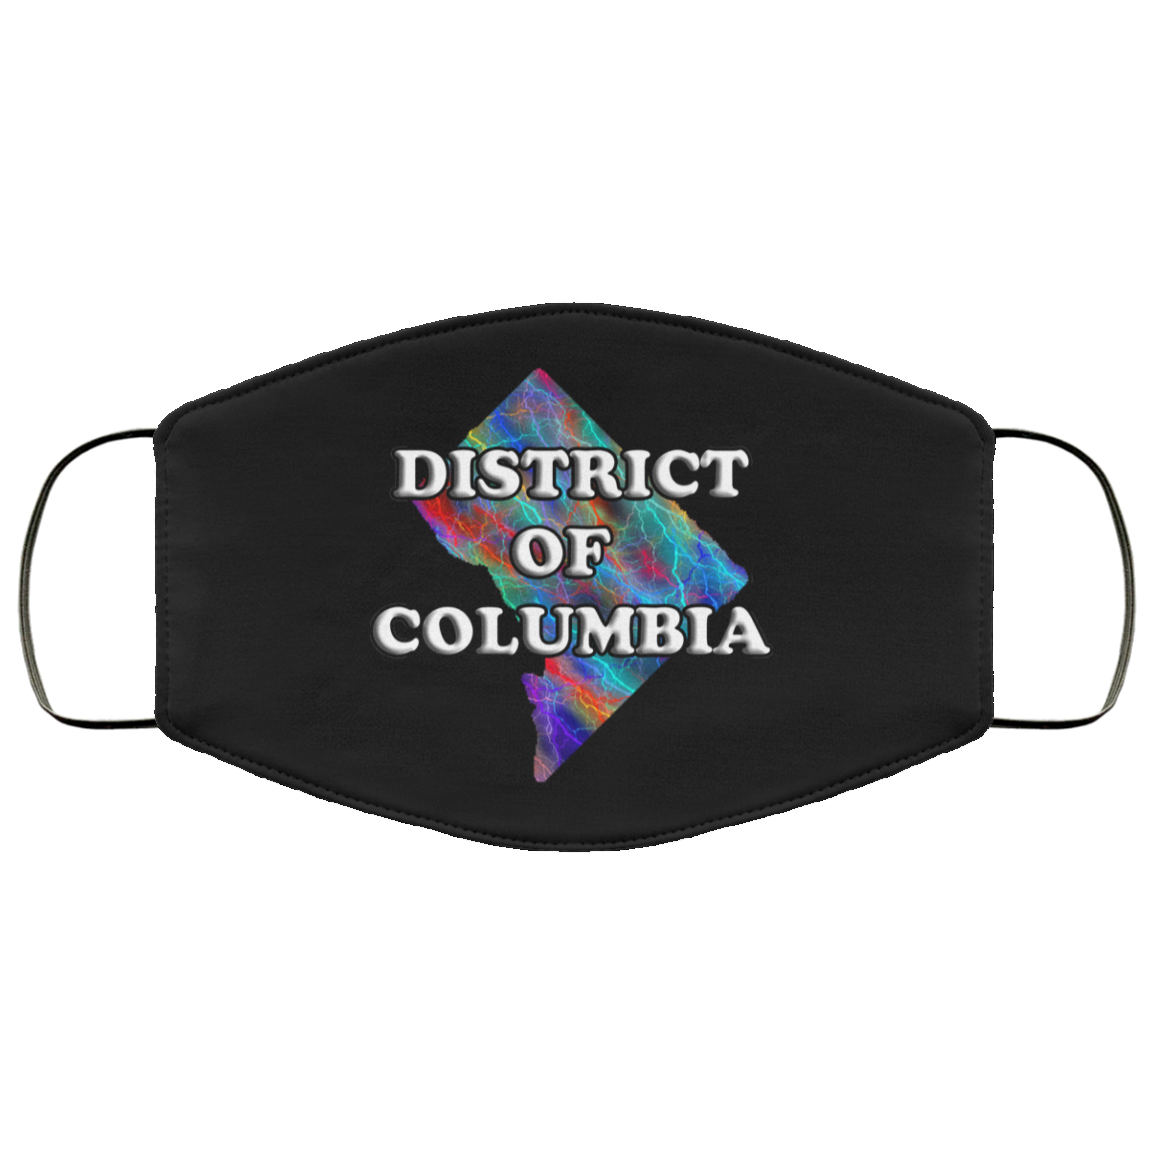 District of Columbia 2 Layer Protective Face Mask